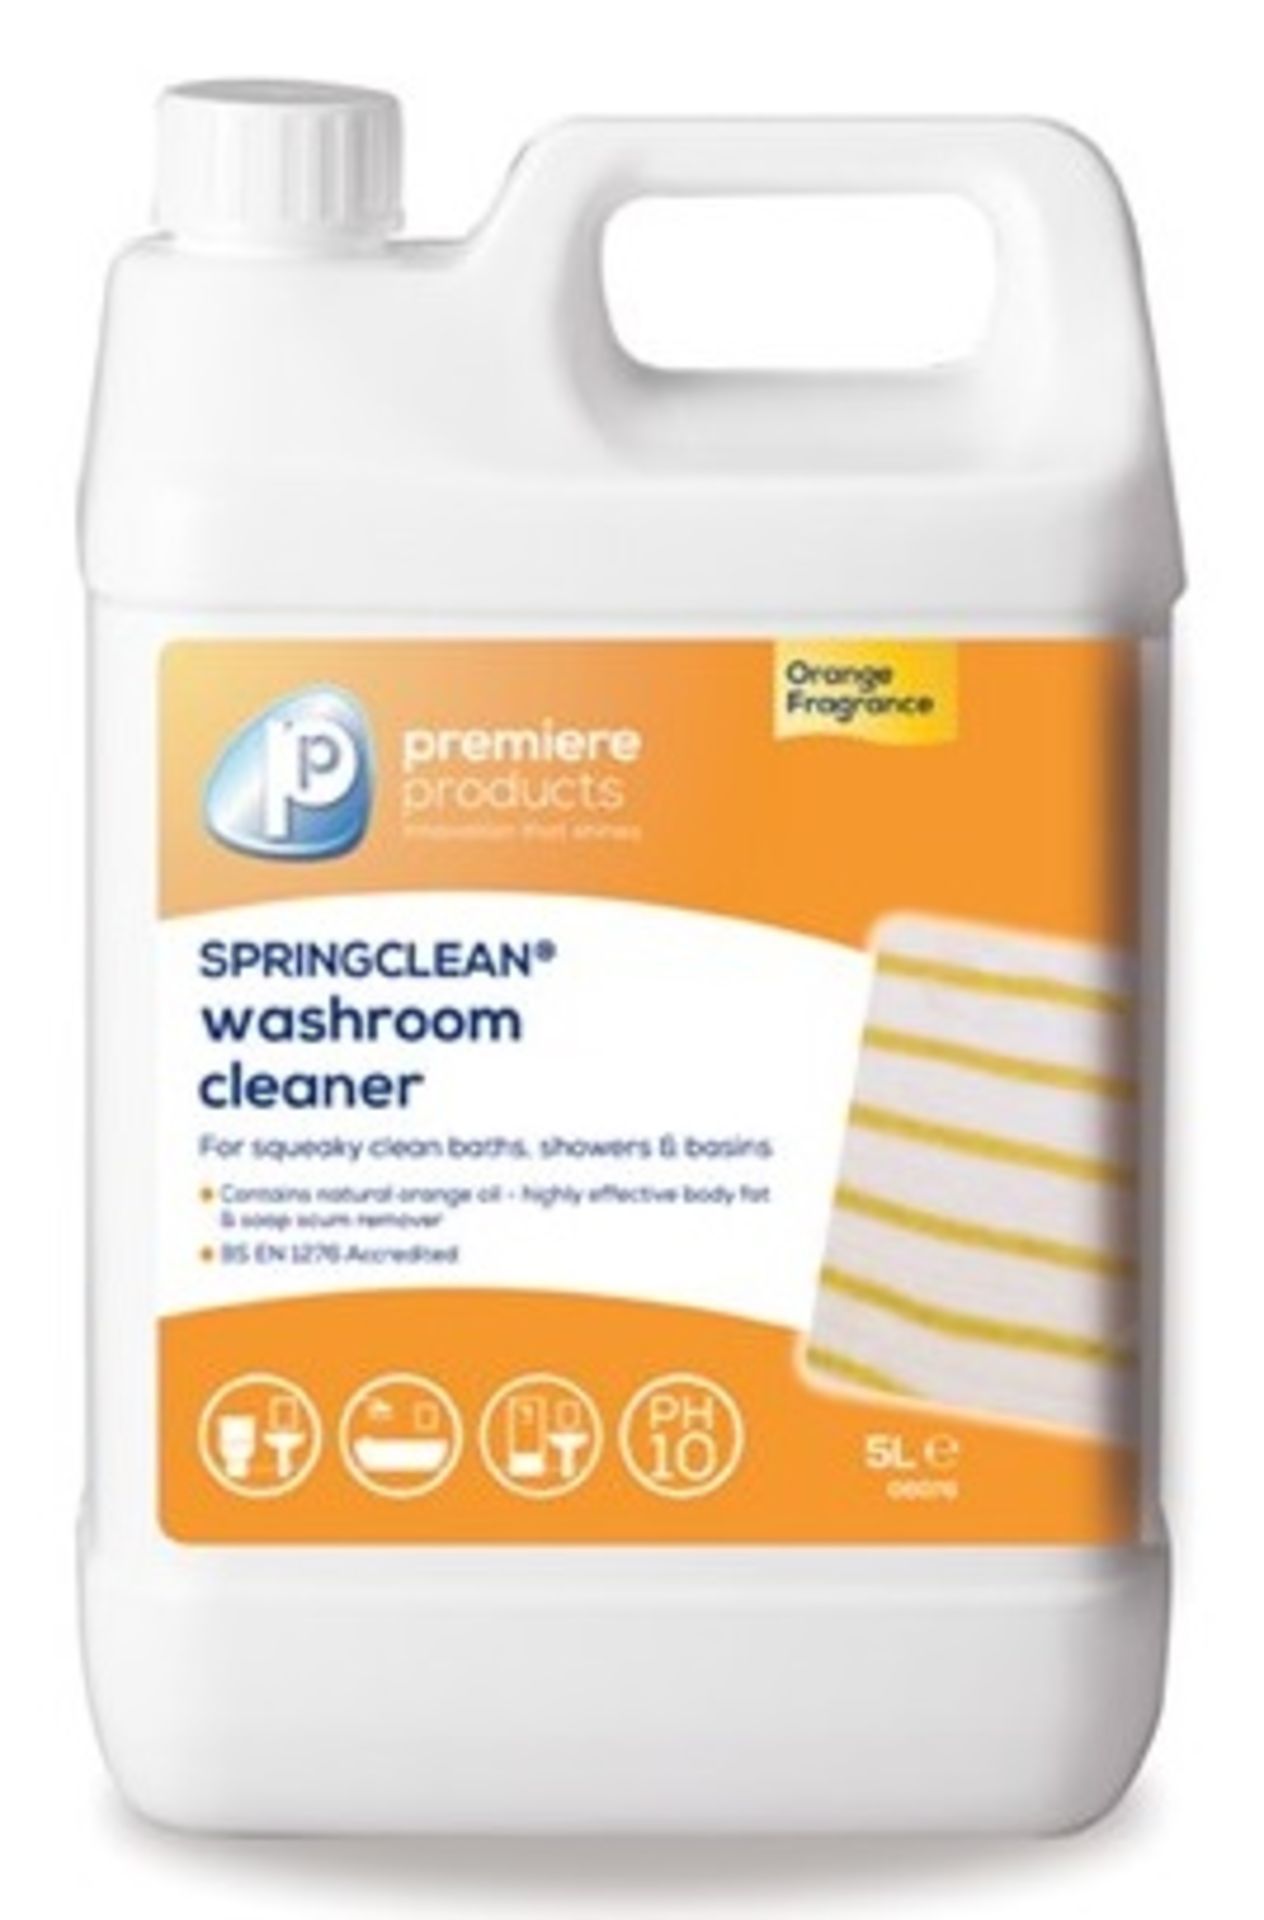 2 x Premiere 5 Litre Spring Clean Washroom Cleaner - Premiere Products - Includes 2 x 5 Litre Contai